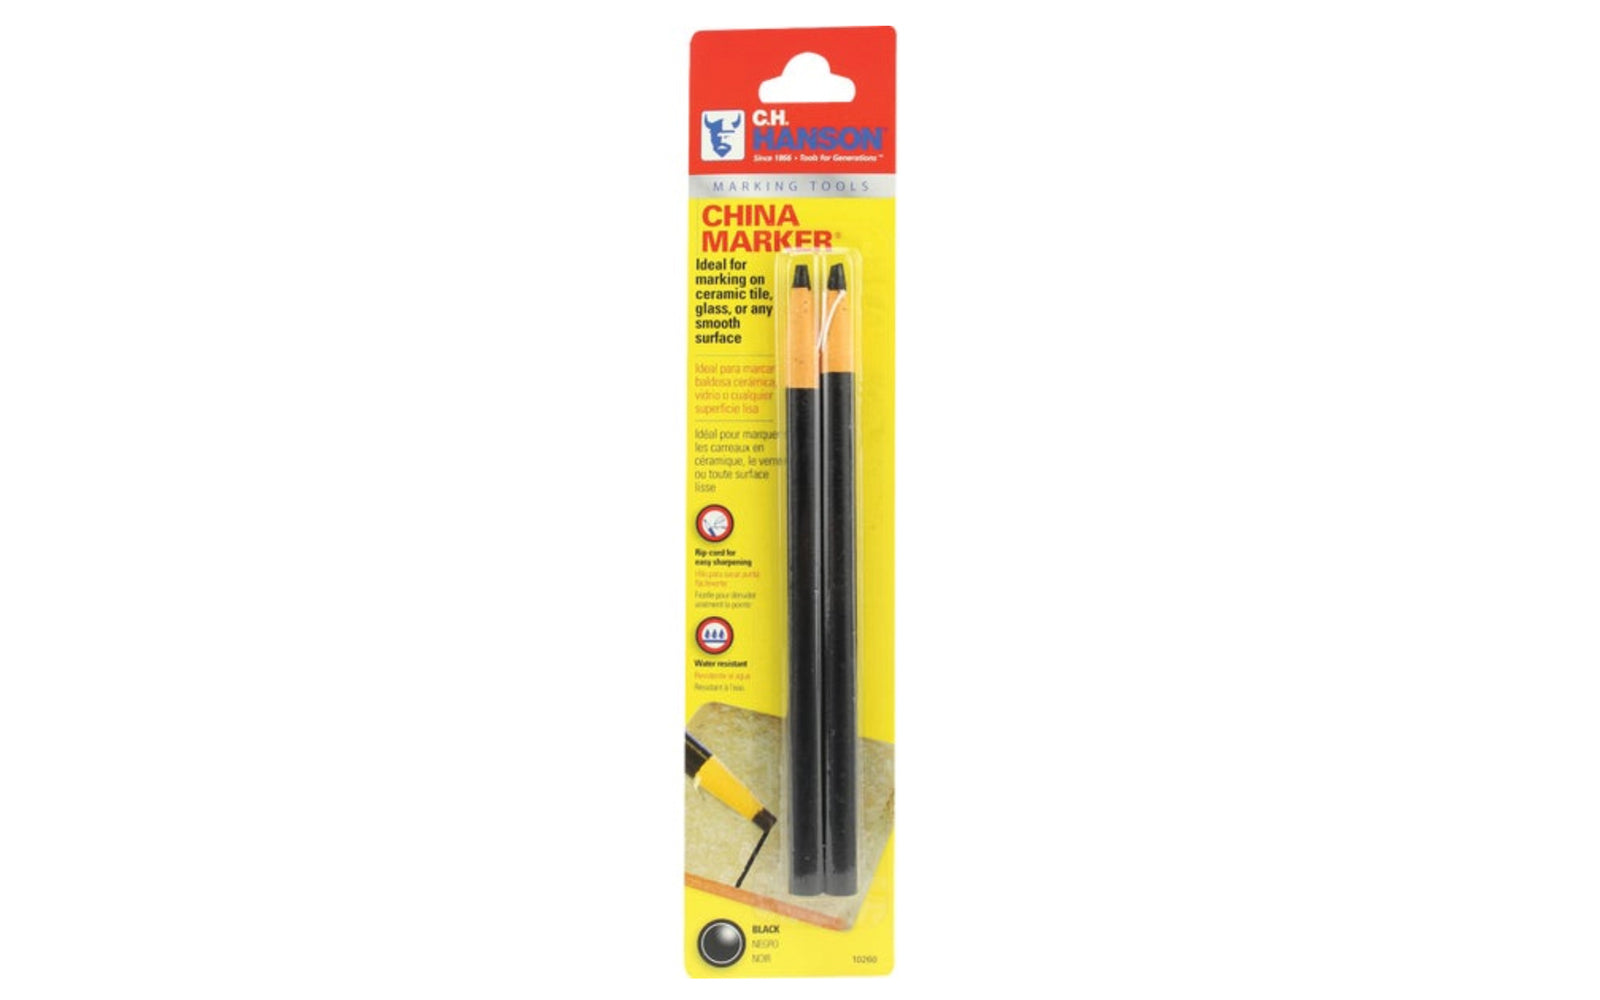 These C.H. Hanson China Markers are ideal for writing on china, glass, or plastic. Marks on porous & nonporous surfaces. Marks on wet surfaces. Easy peel off wrap. 5/16" Diameter x 6-3/4"  Length. Black color. 2 Pack. CH Hanson China Markers.